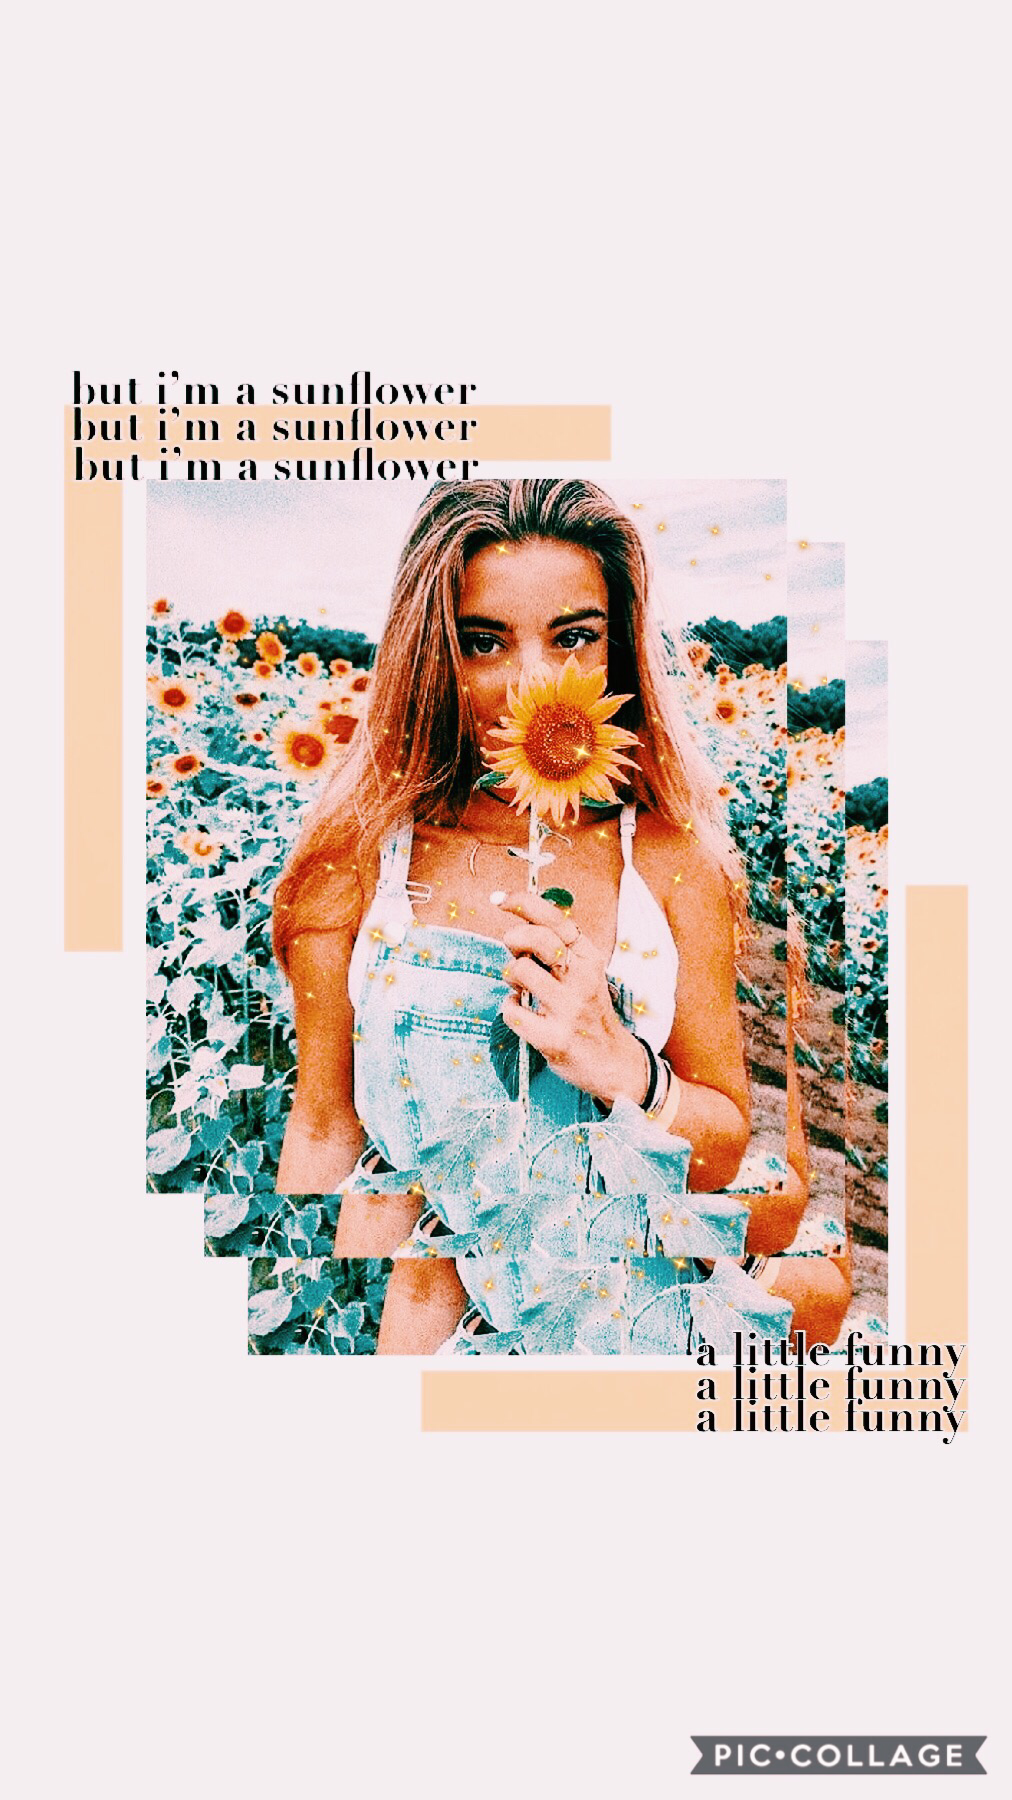 tap the 🌻 

hope y’all like ! :)